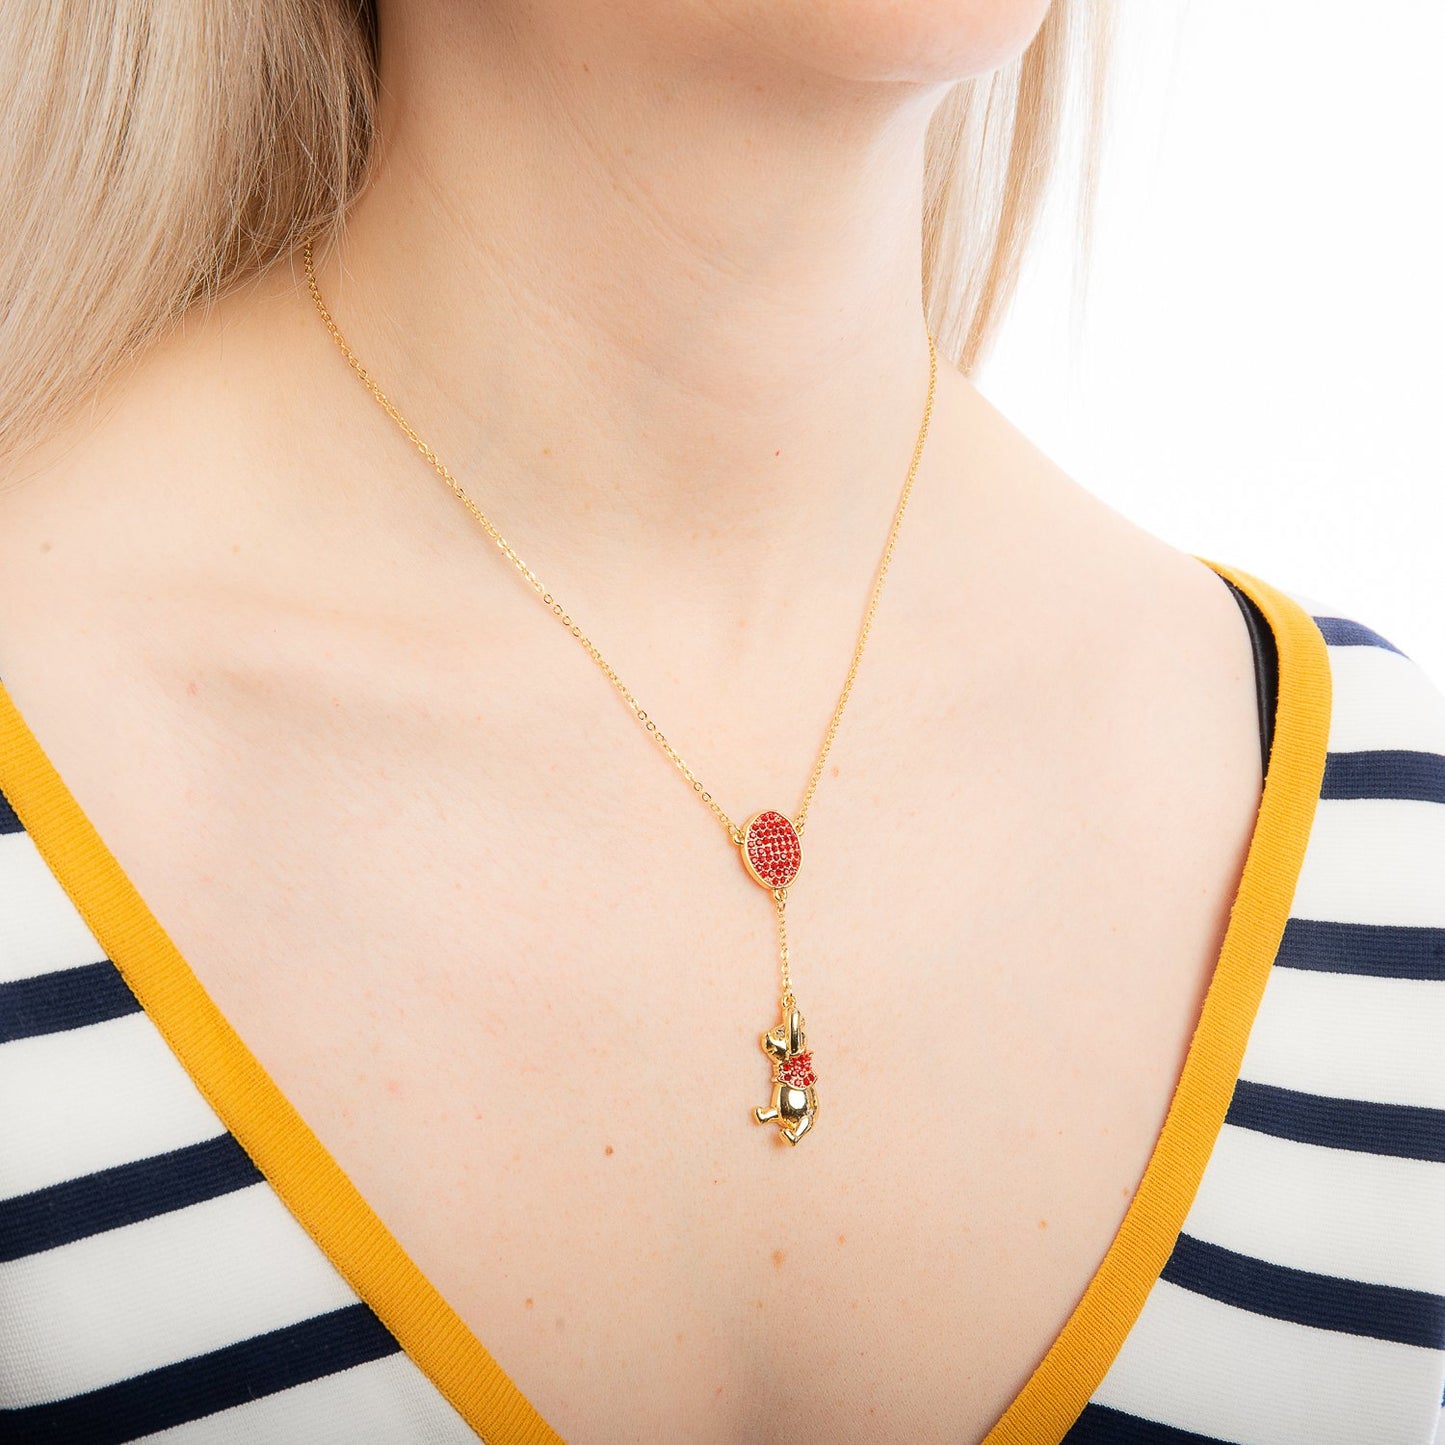 Load image into Gallery viewer, Winnie The Pooh (Balloon)  95th Anniversary Crystal Accent Disney Couture Necklace
